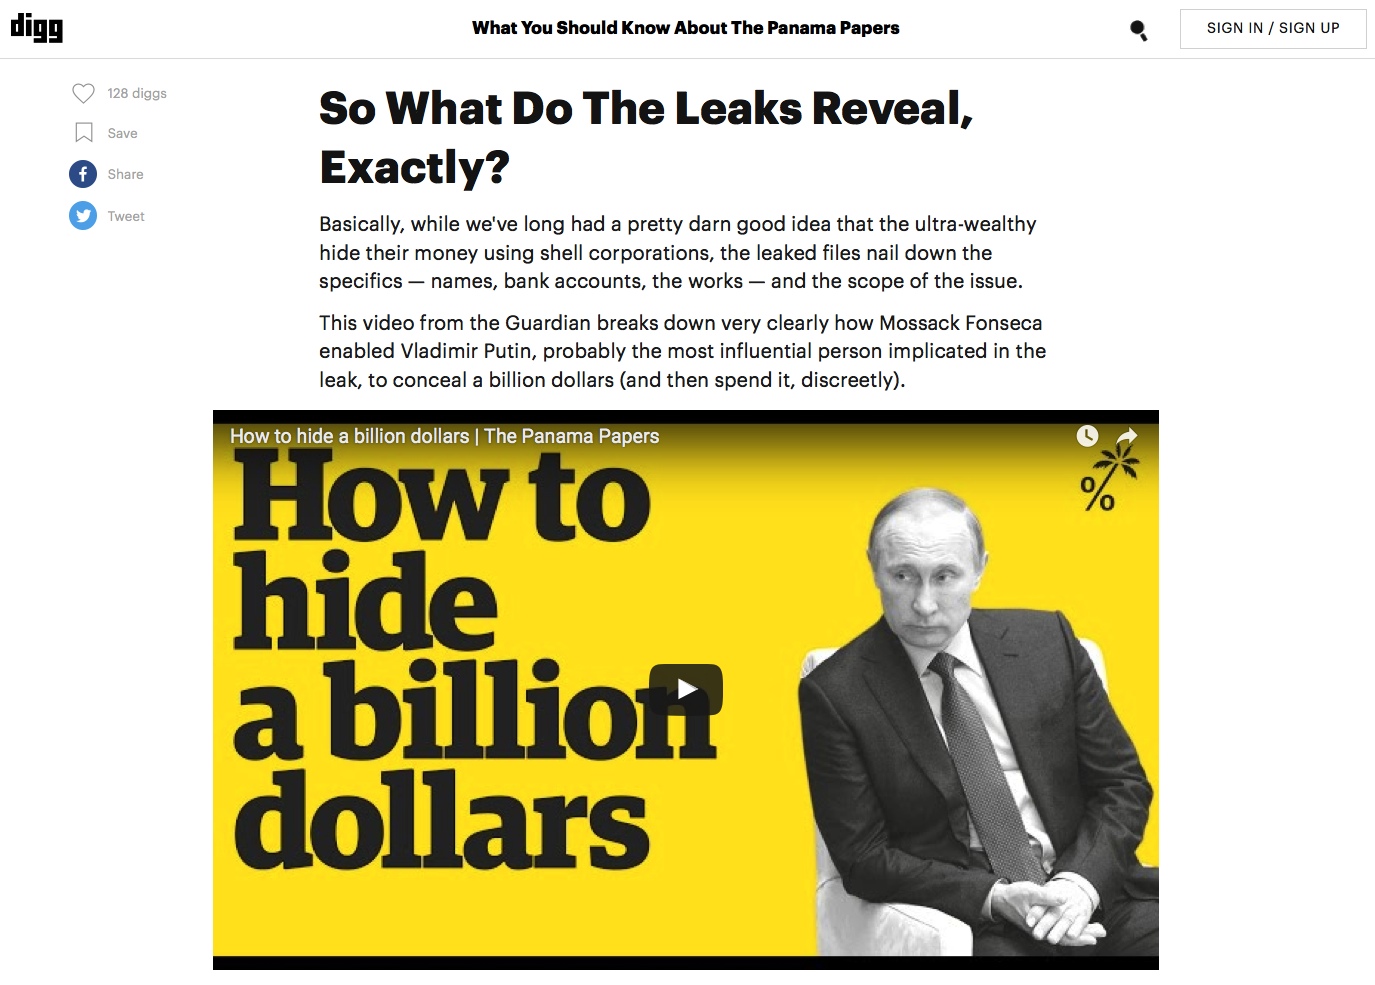 UPDATES ~ David Wilcock ~ The Panama Toilet Papers and the Ascension Mysteries #1! Digg_panama_putin